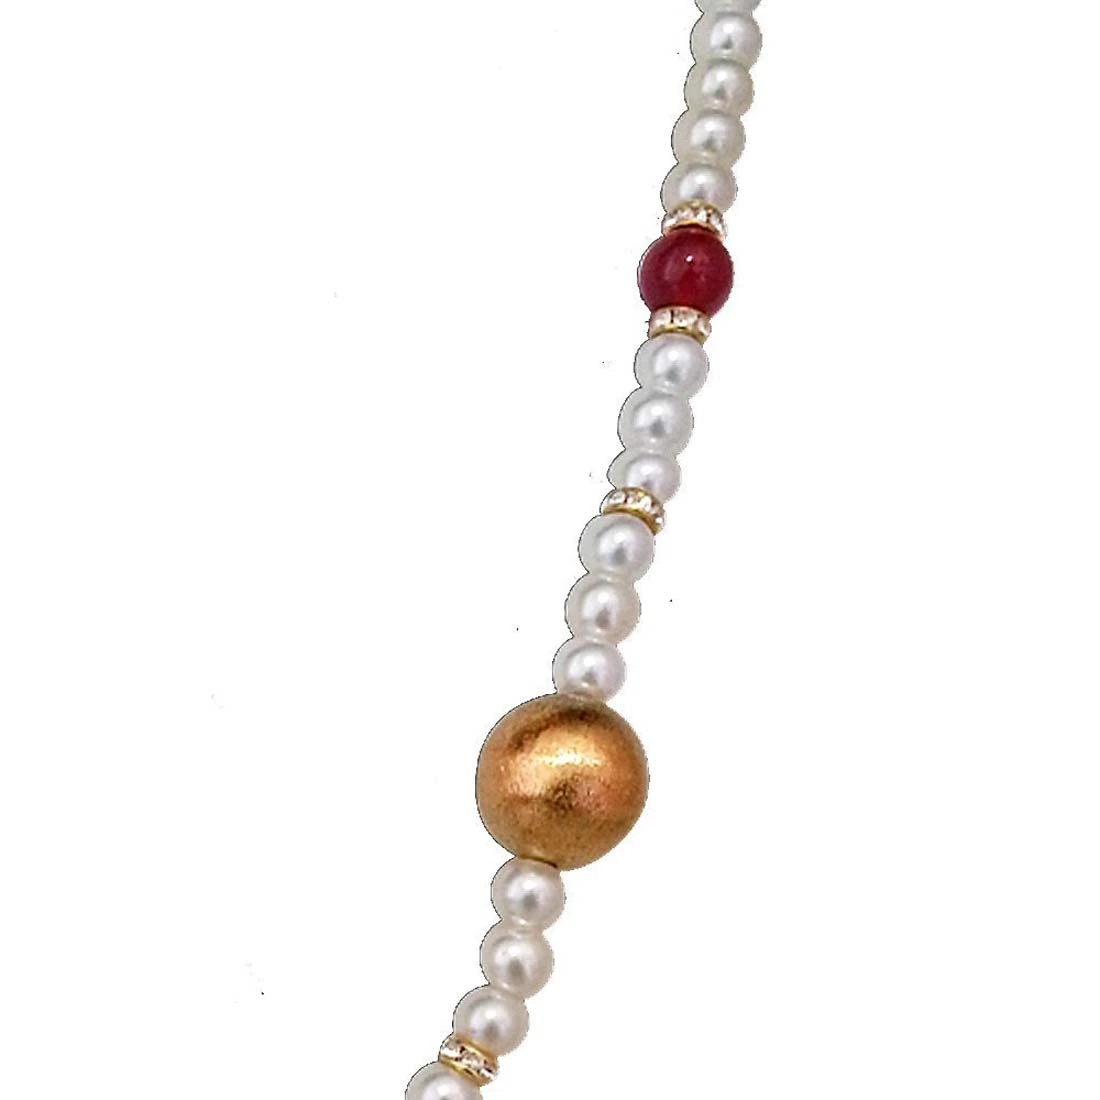 Exotic - Kundan Ball, Shell Pearls & Red Coloured Stone Necklace (SN642)